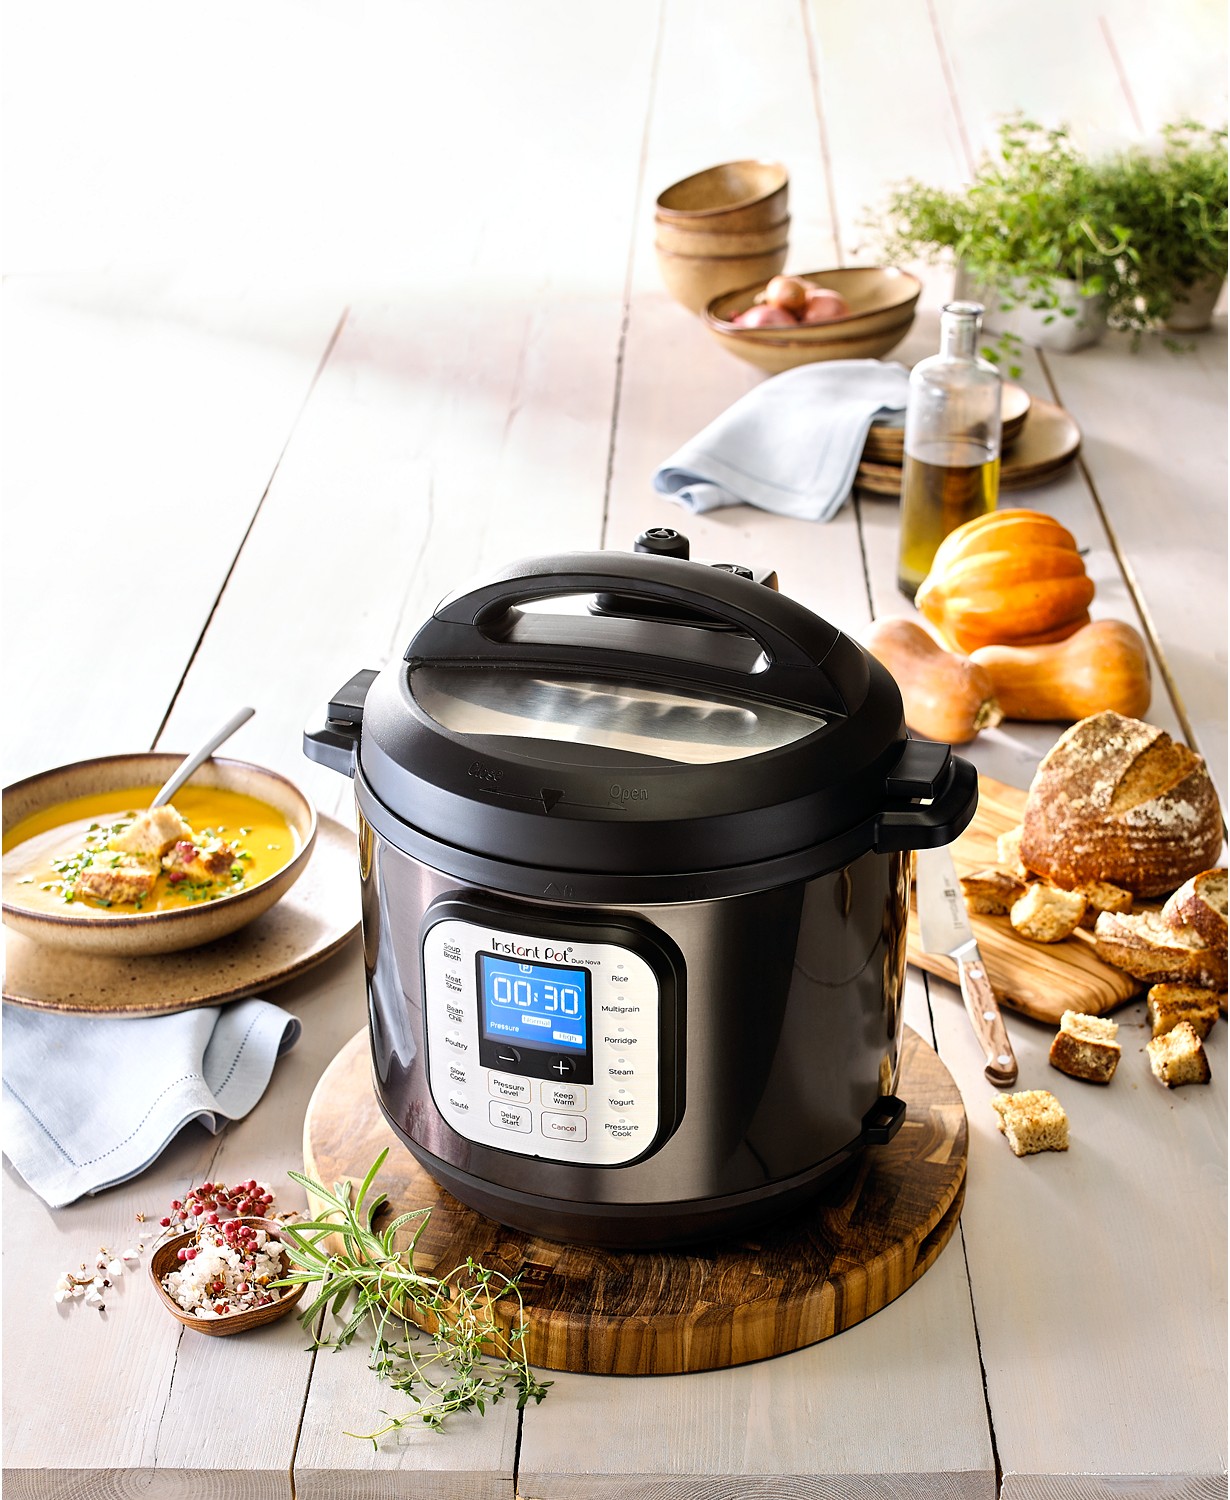 (52% OFF) Instant Pot Duo Black Stainless Steel 6-Qt. 7-in-1 One-Touch Multi-Cooker $59.99